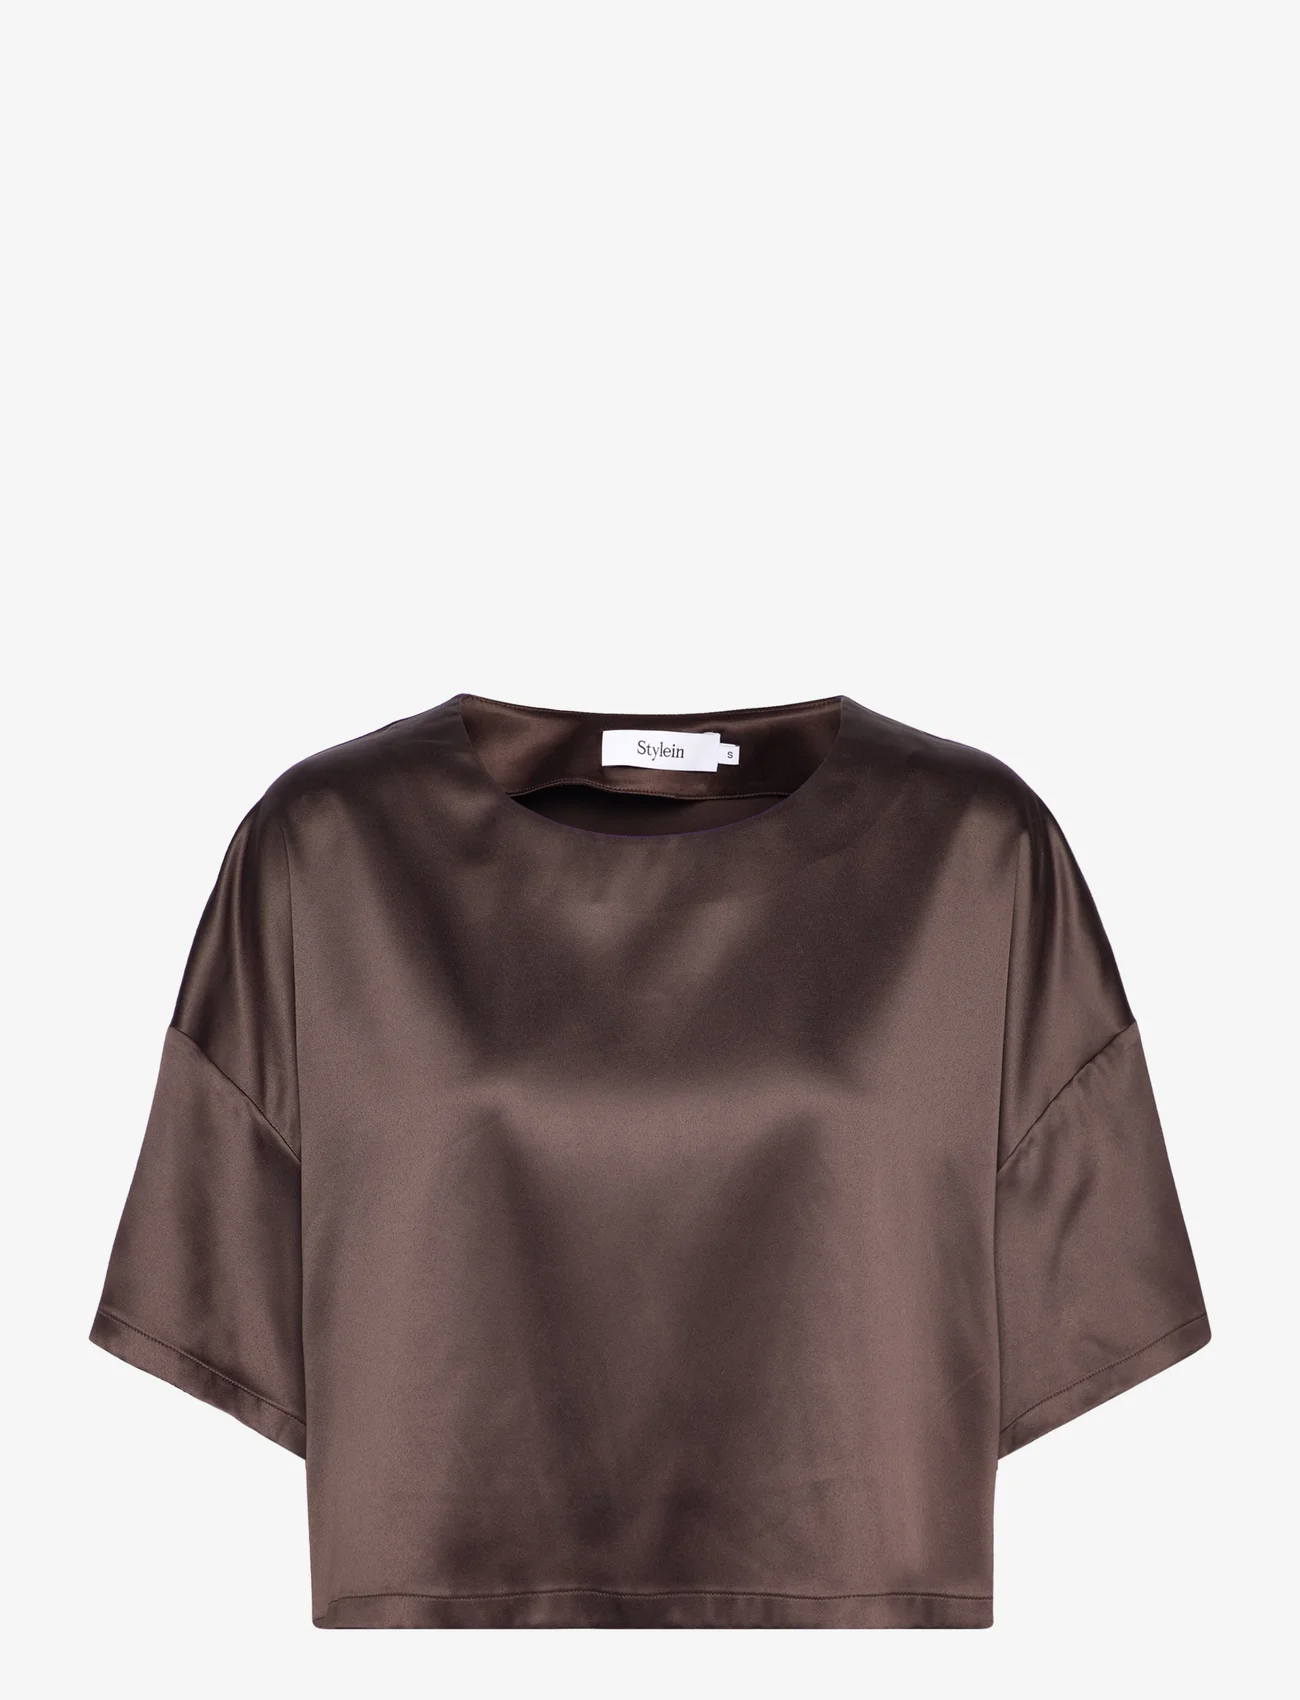 Stylein - MIMI T-SHIRT - short-sleeved blouses - brown - 0